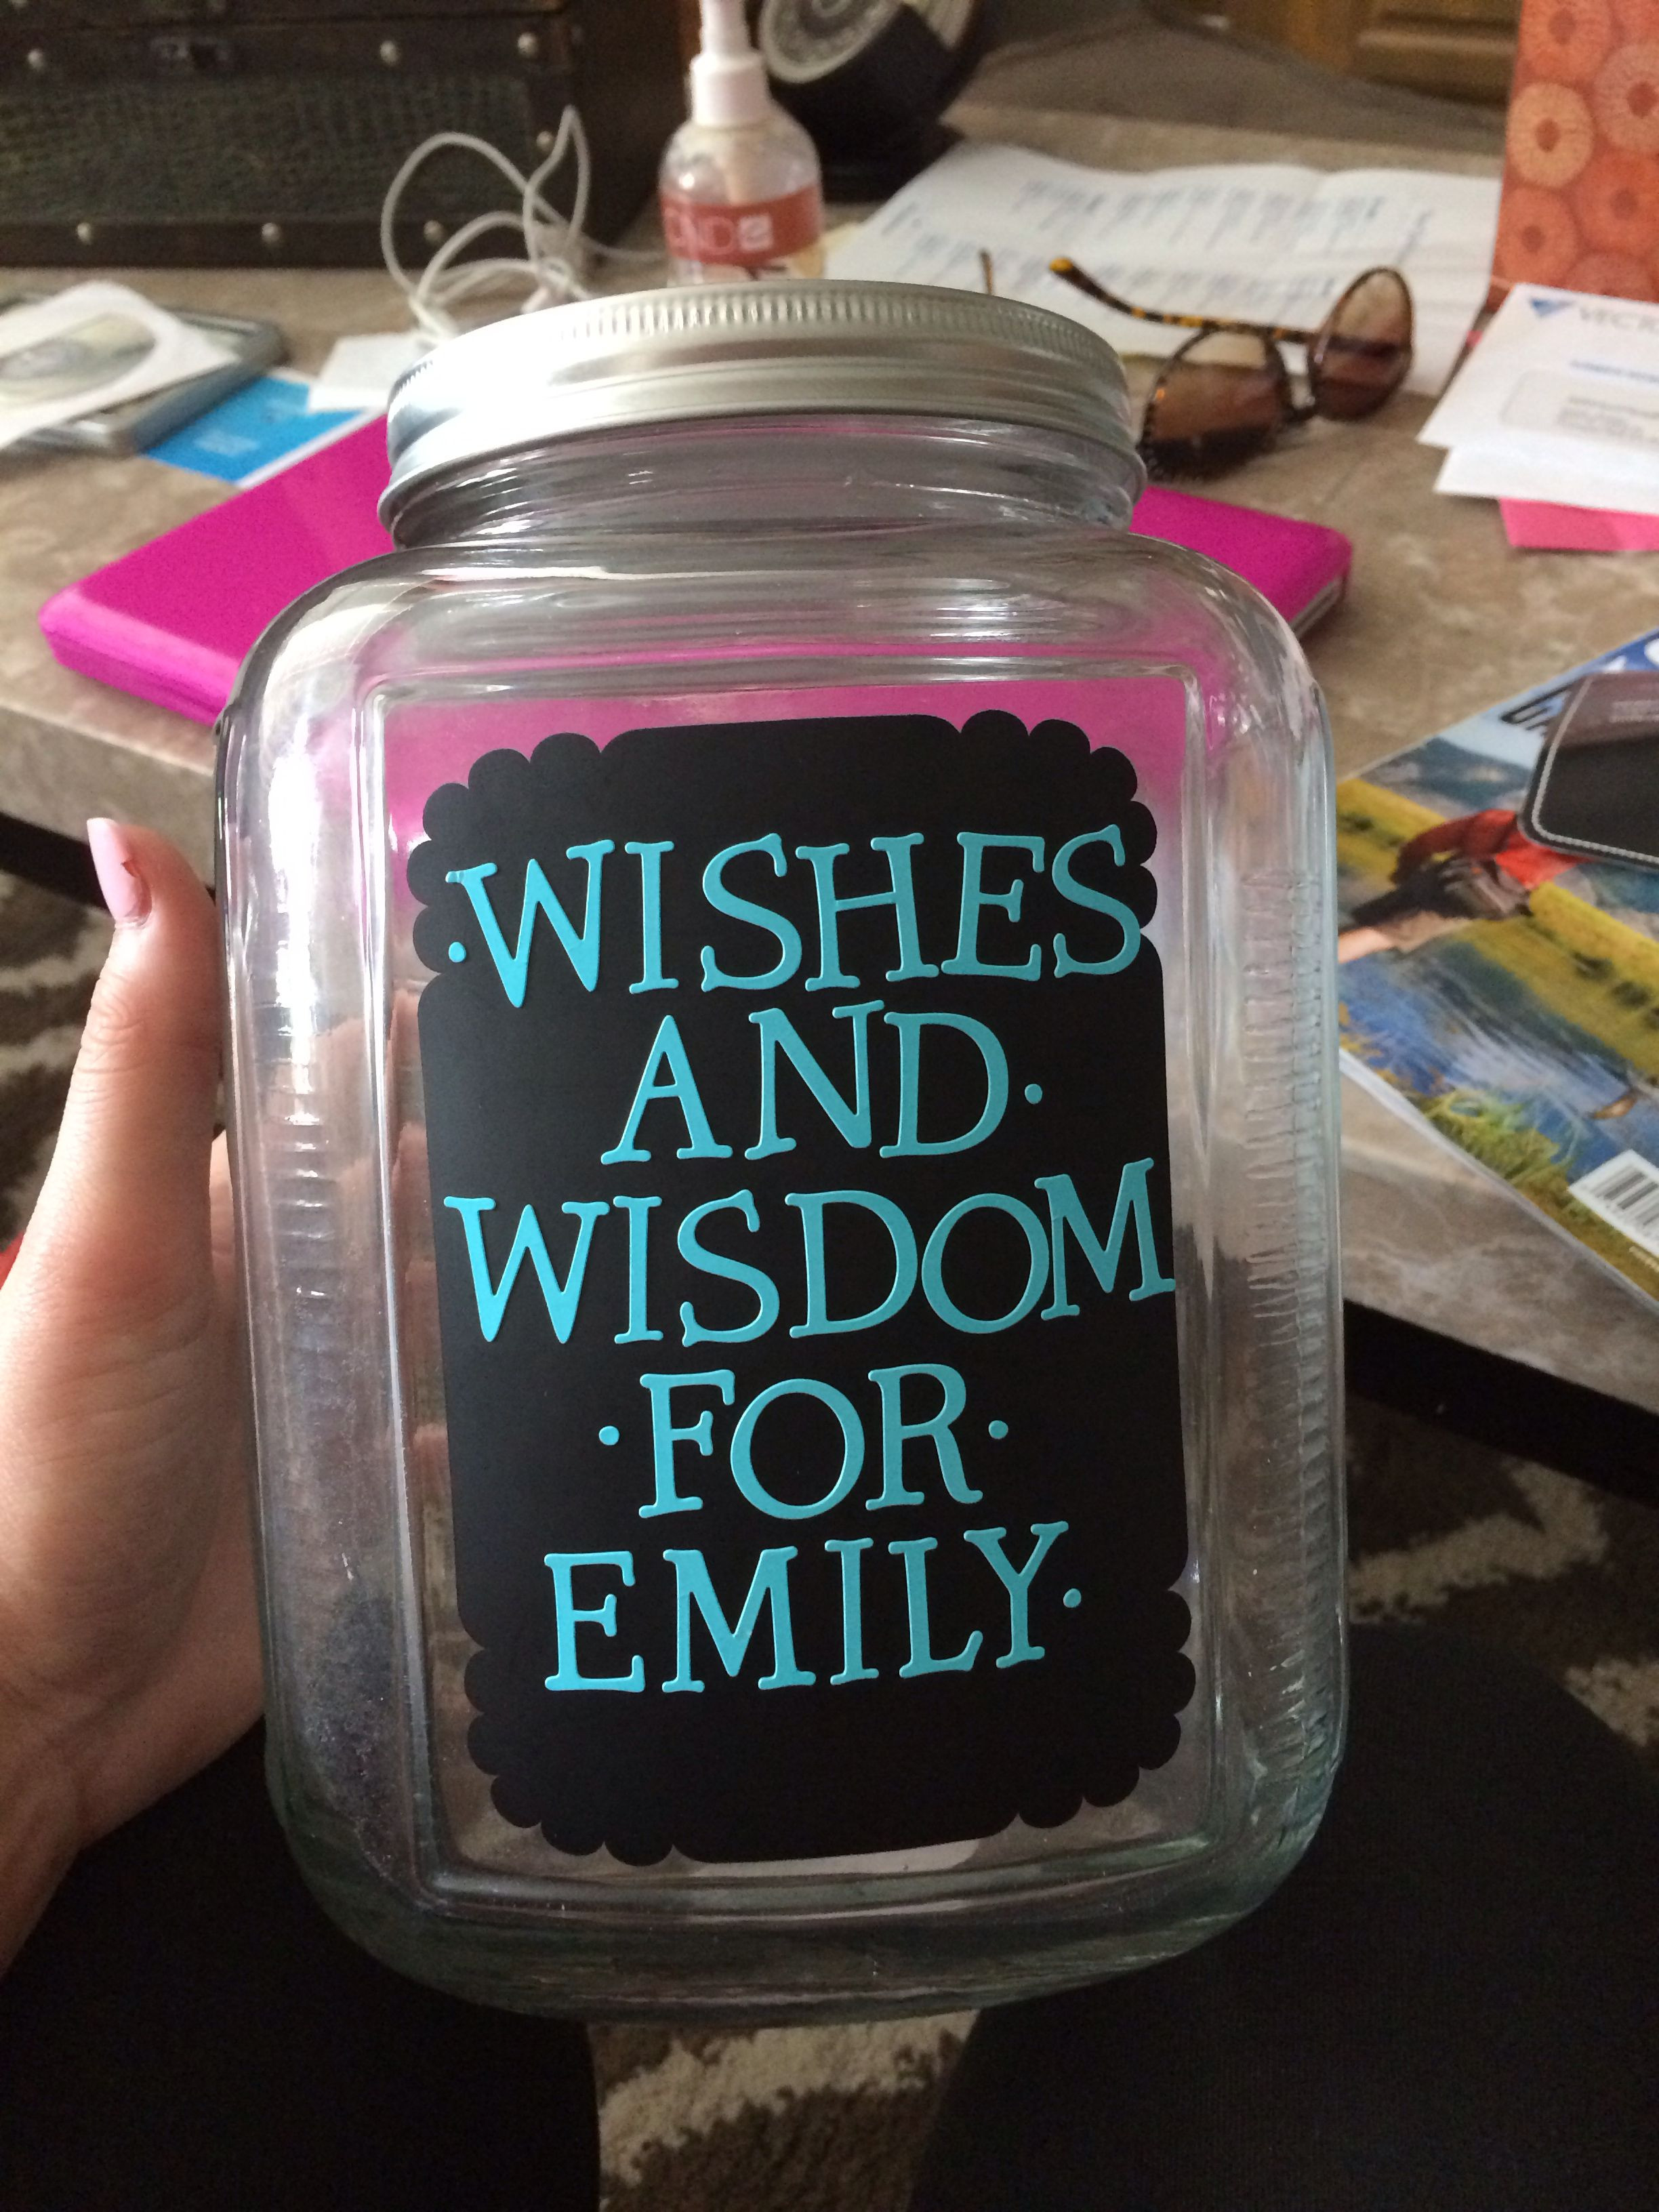 Graduation Party Ideas For College Students
 Wishes and wisdom Jar for graduation parties